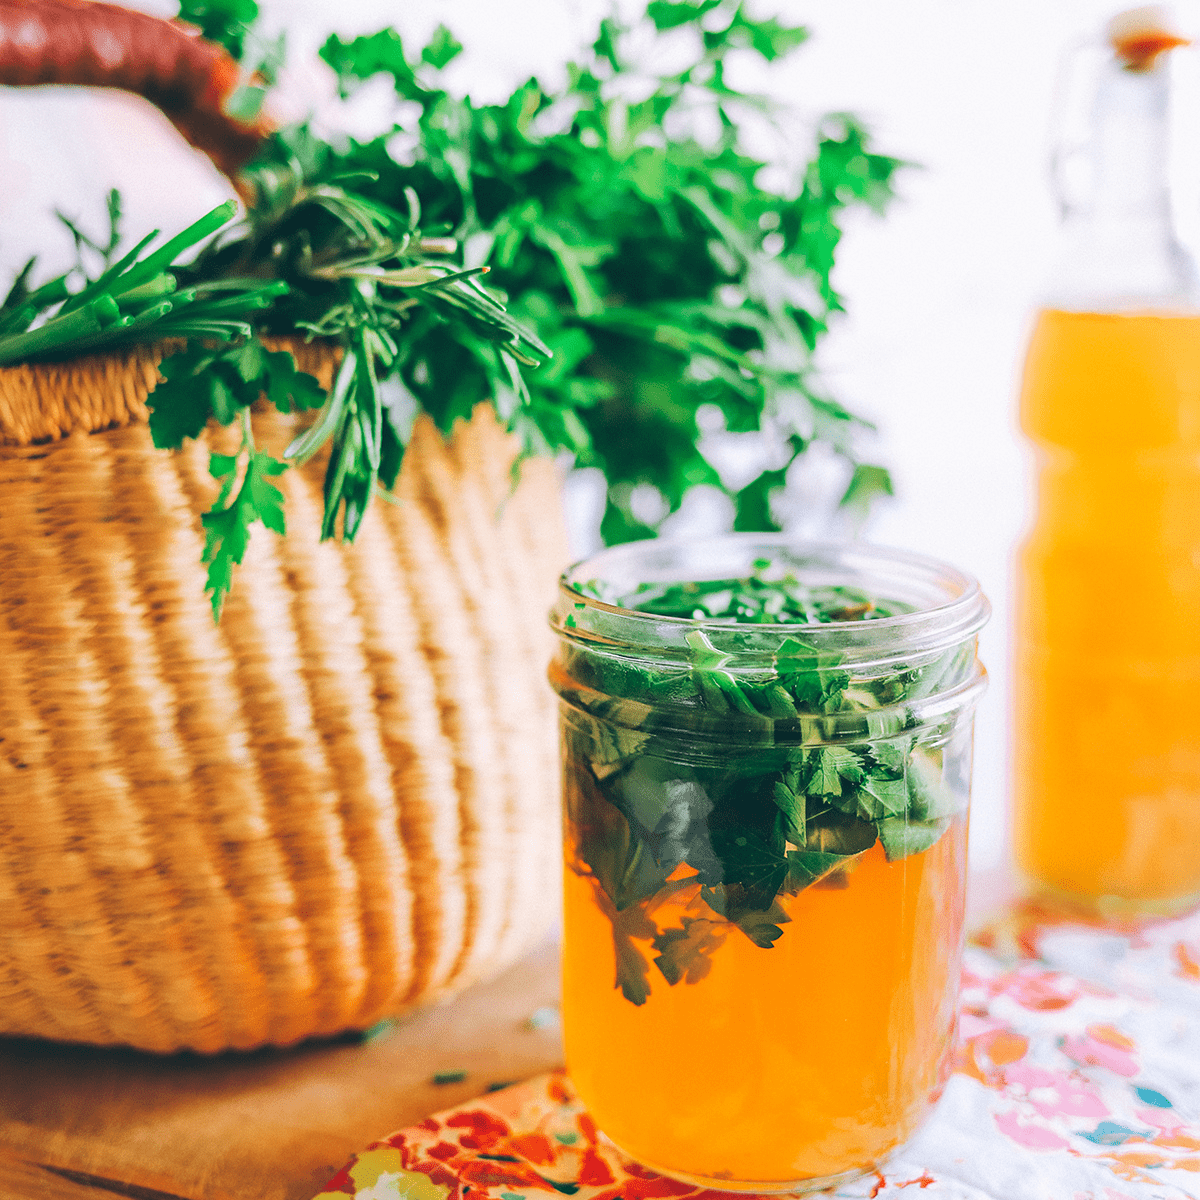 Herbal Kitchen Remedy Solutions